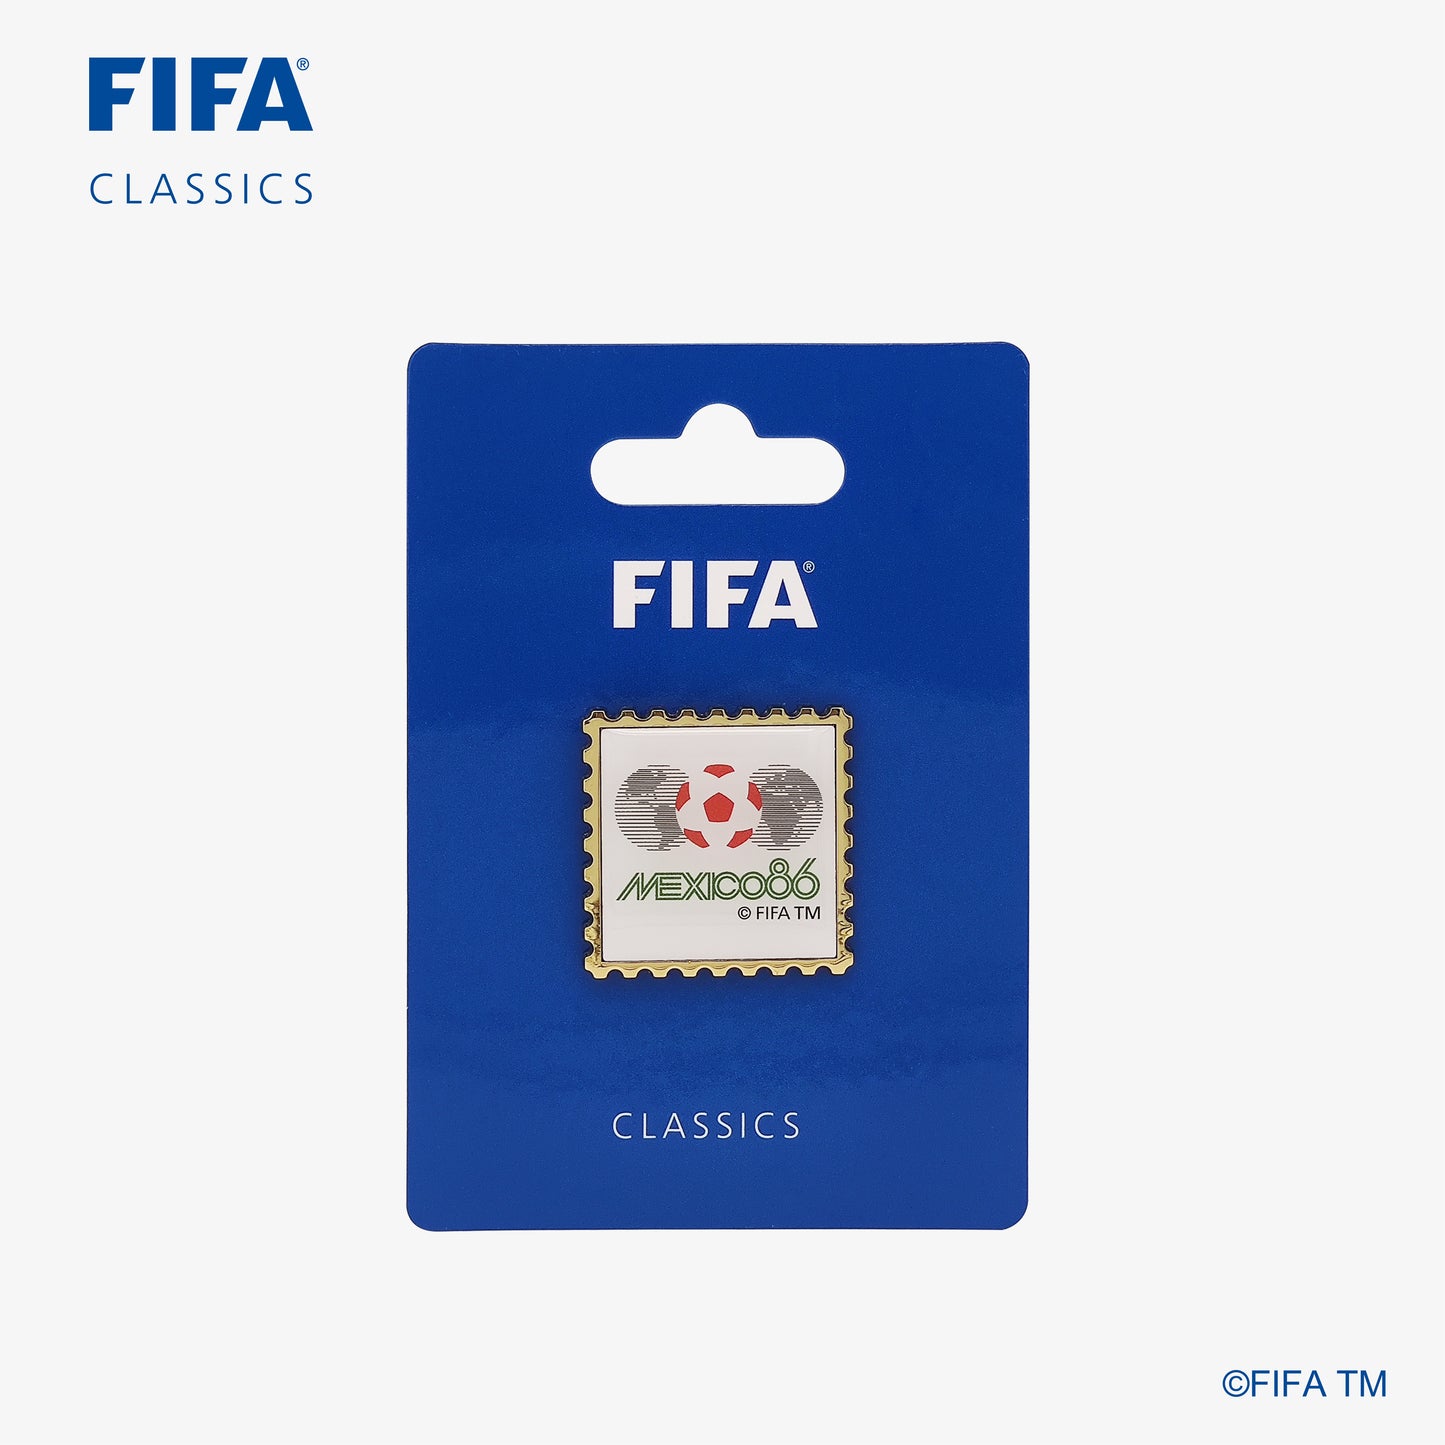 Historical Pin with FIFA classic blue package